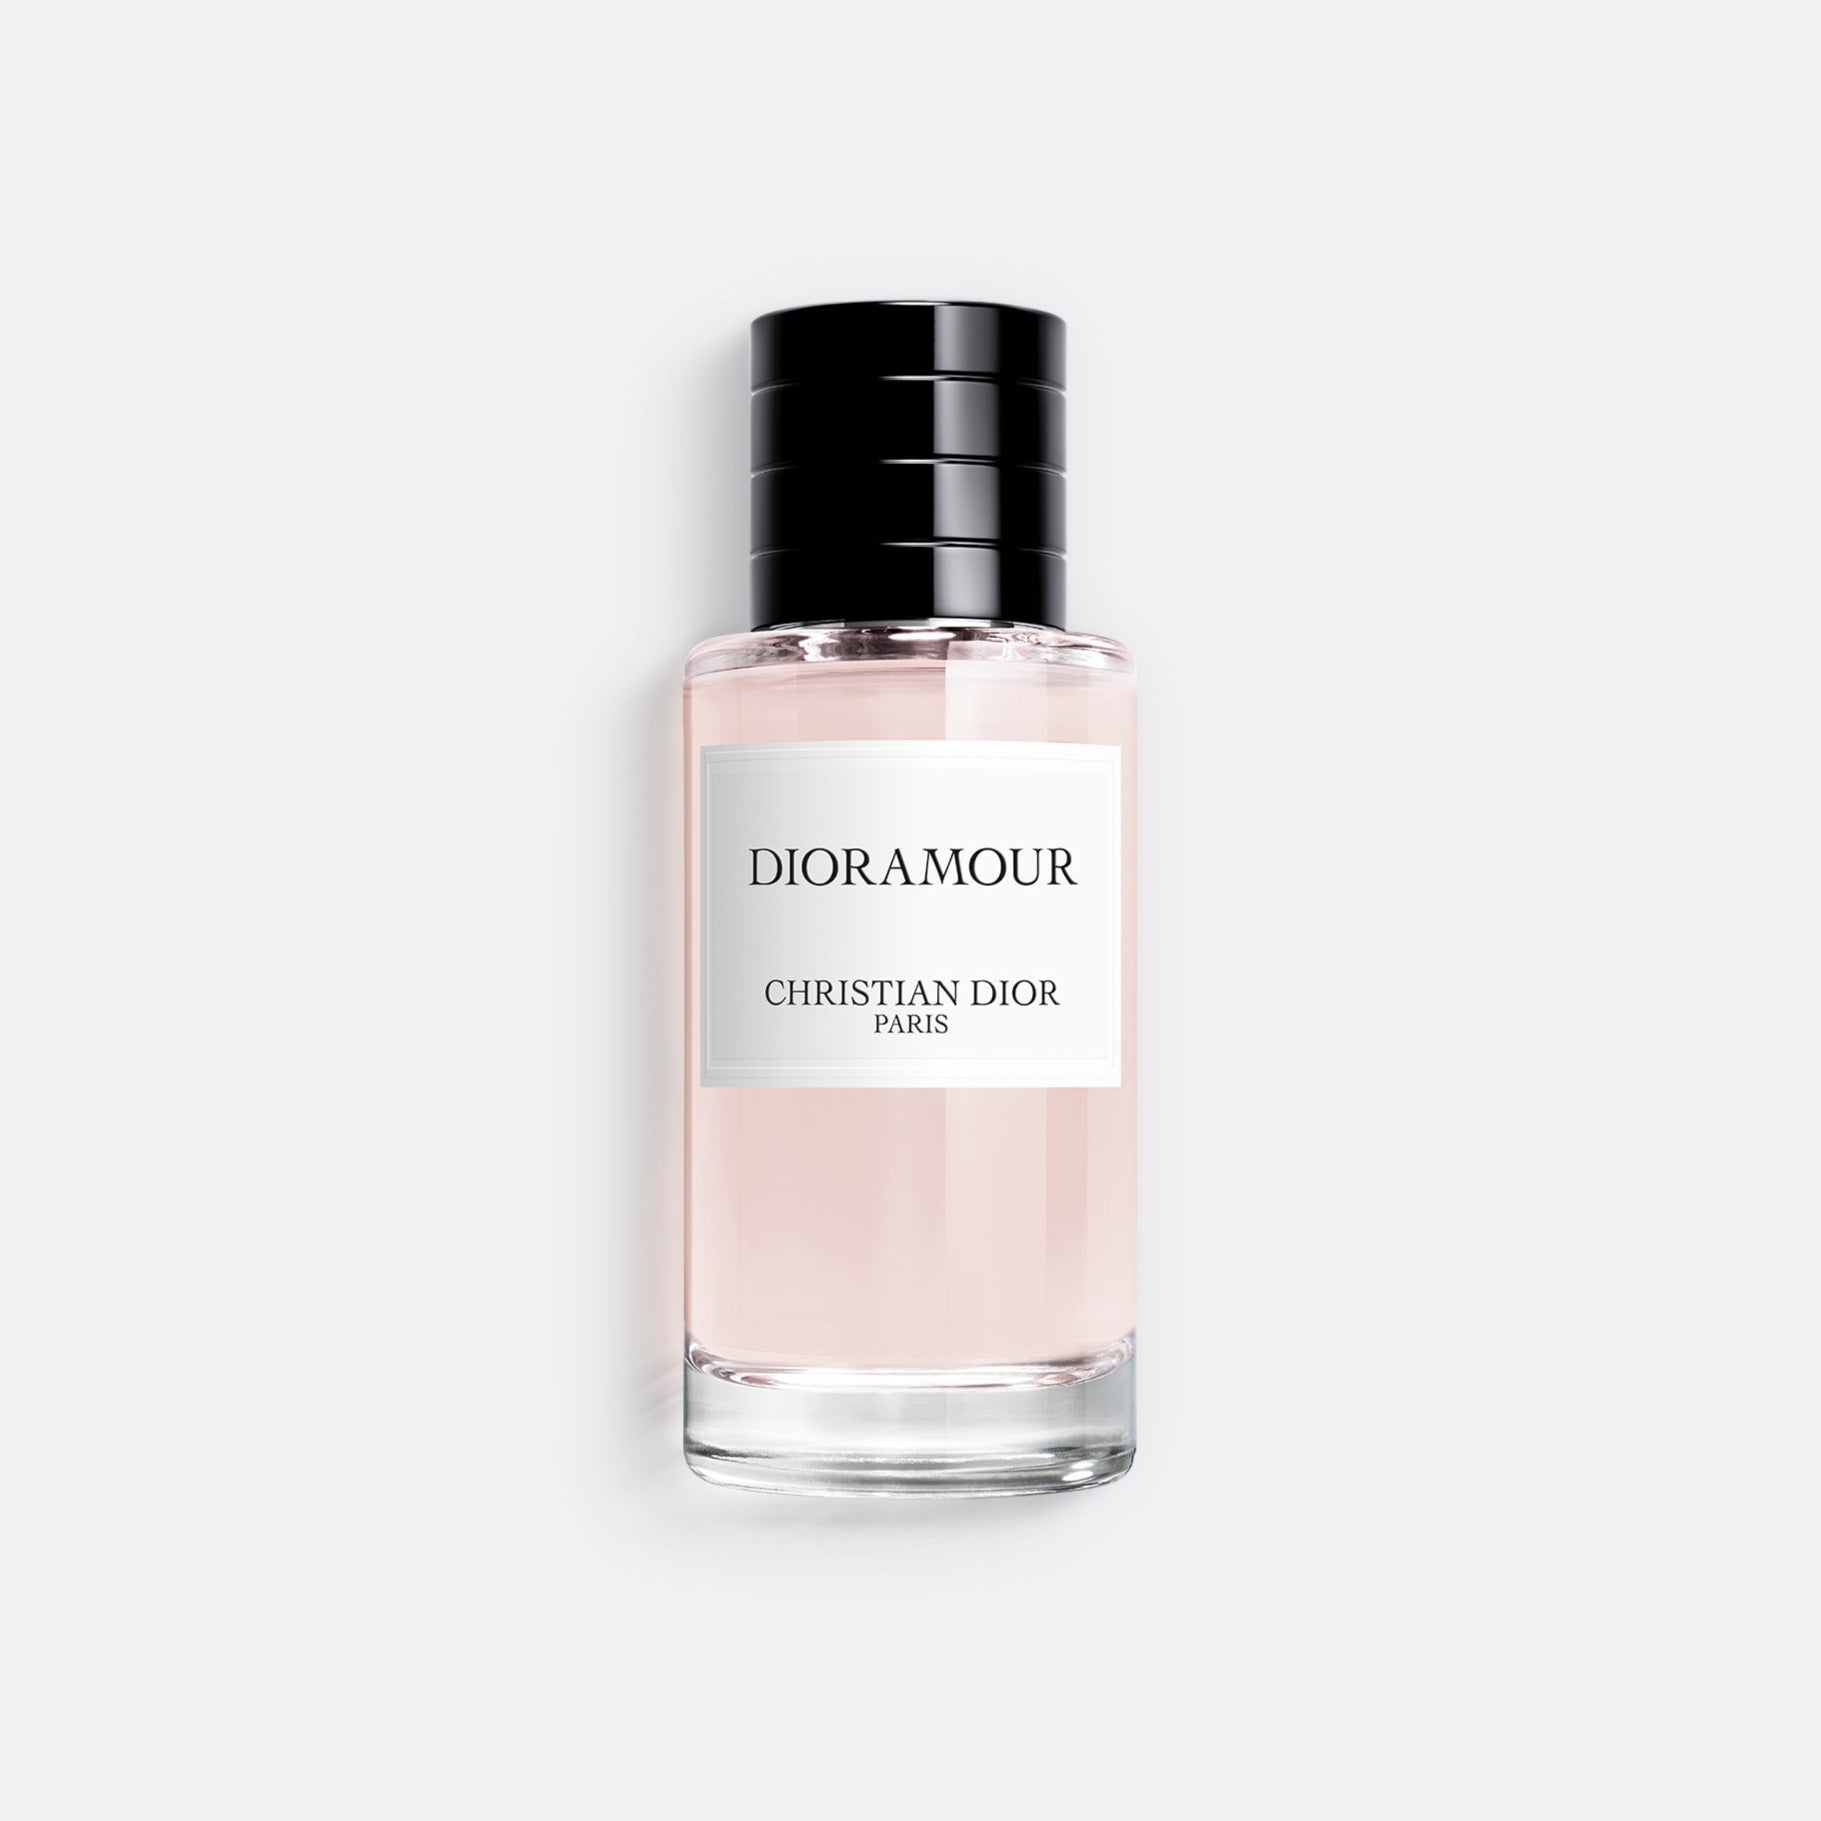 DIORAMOUR ~ Fragrance